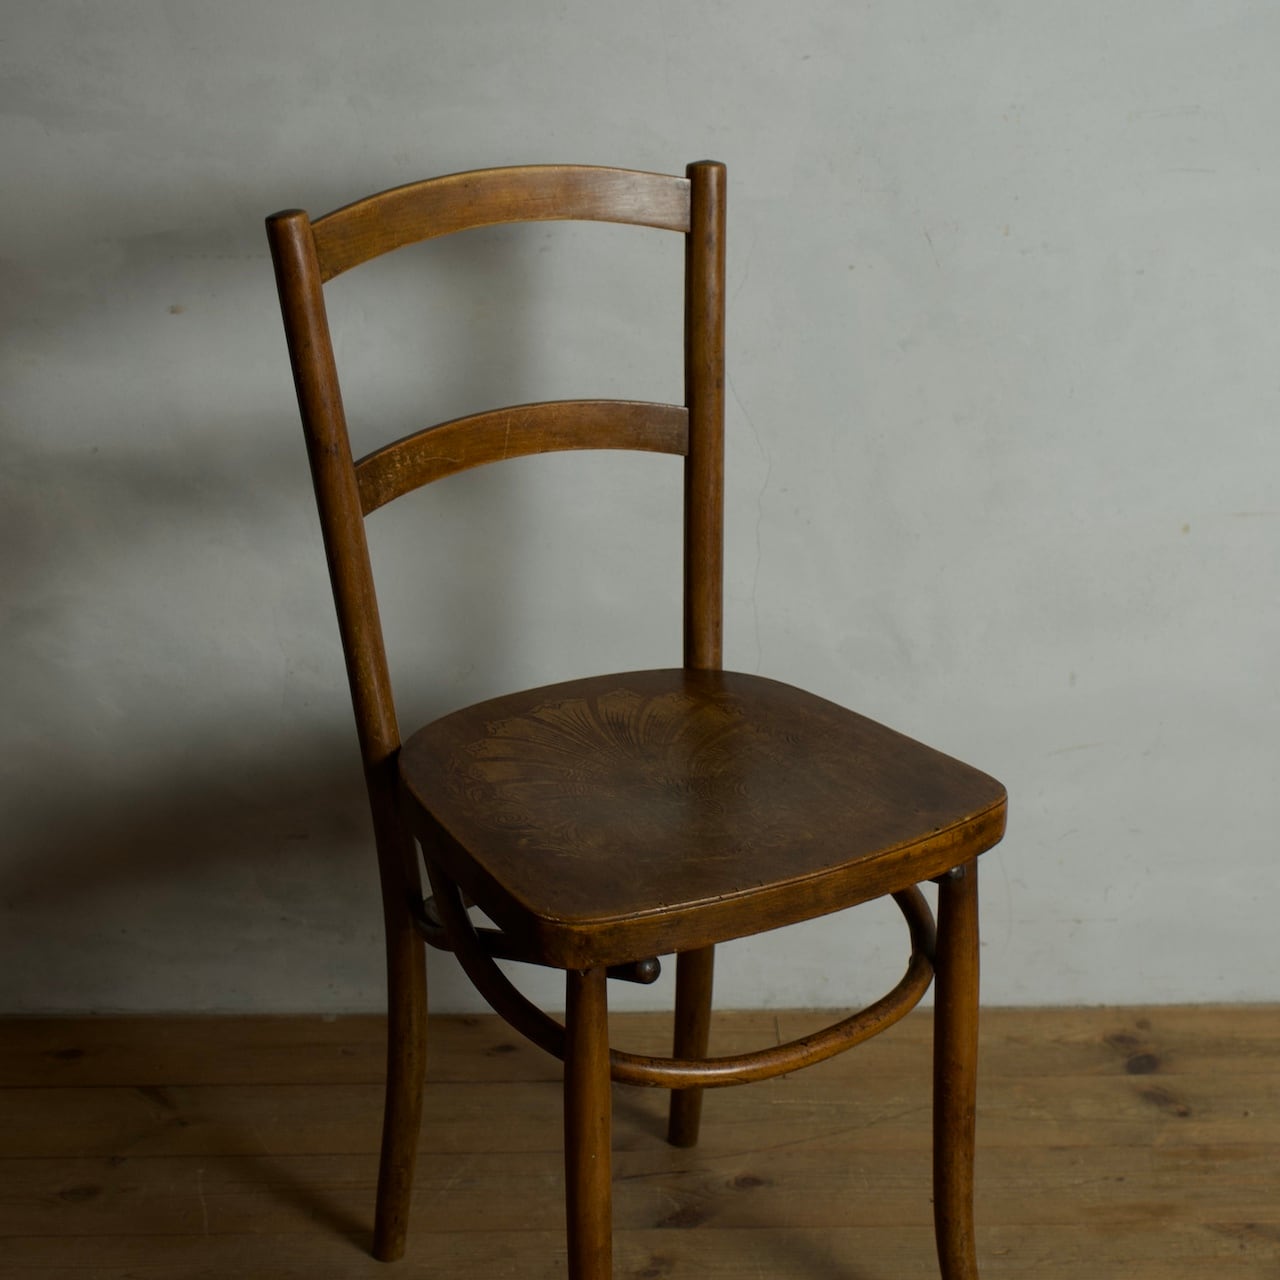 Bentwood Chair / ベントウッド チェア〈チェア・椅子・ダイニングチェア・デスクチェア・曲木〉   SHABBY'S  MARKETPLACE　アンティーク・ヴィンテージ 家具や雑貨のお店 powered by BASE